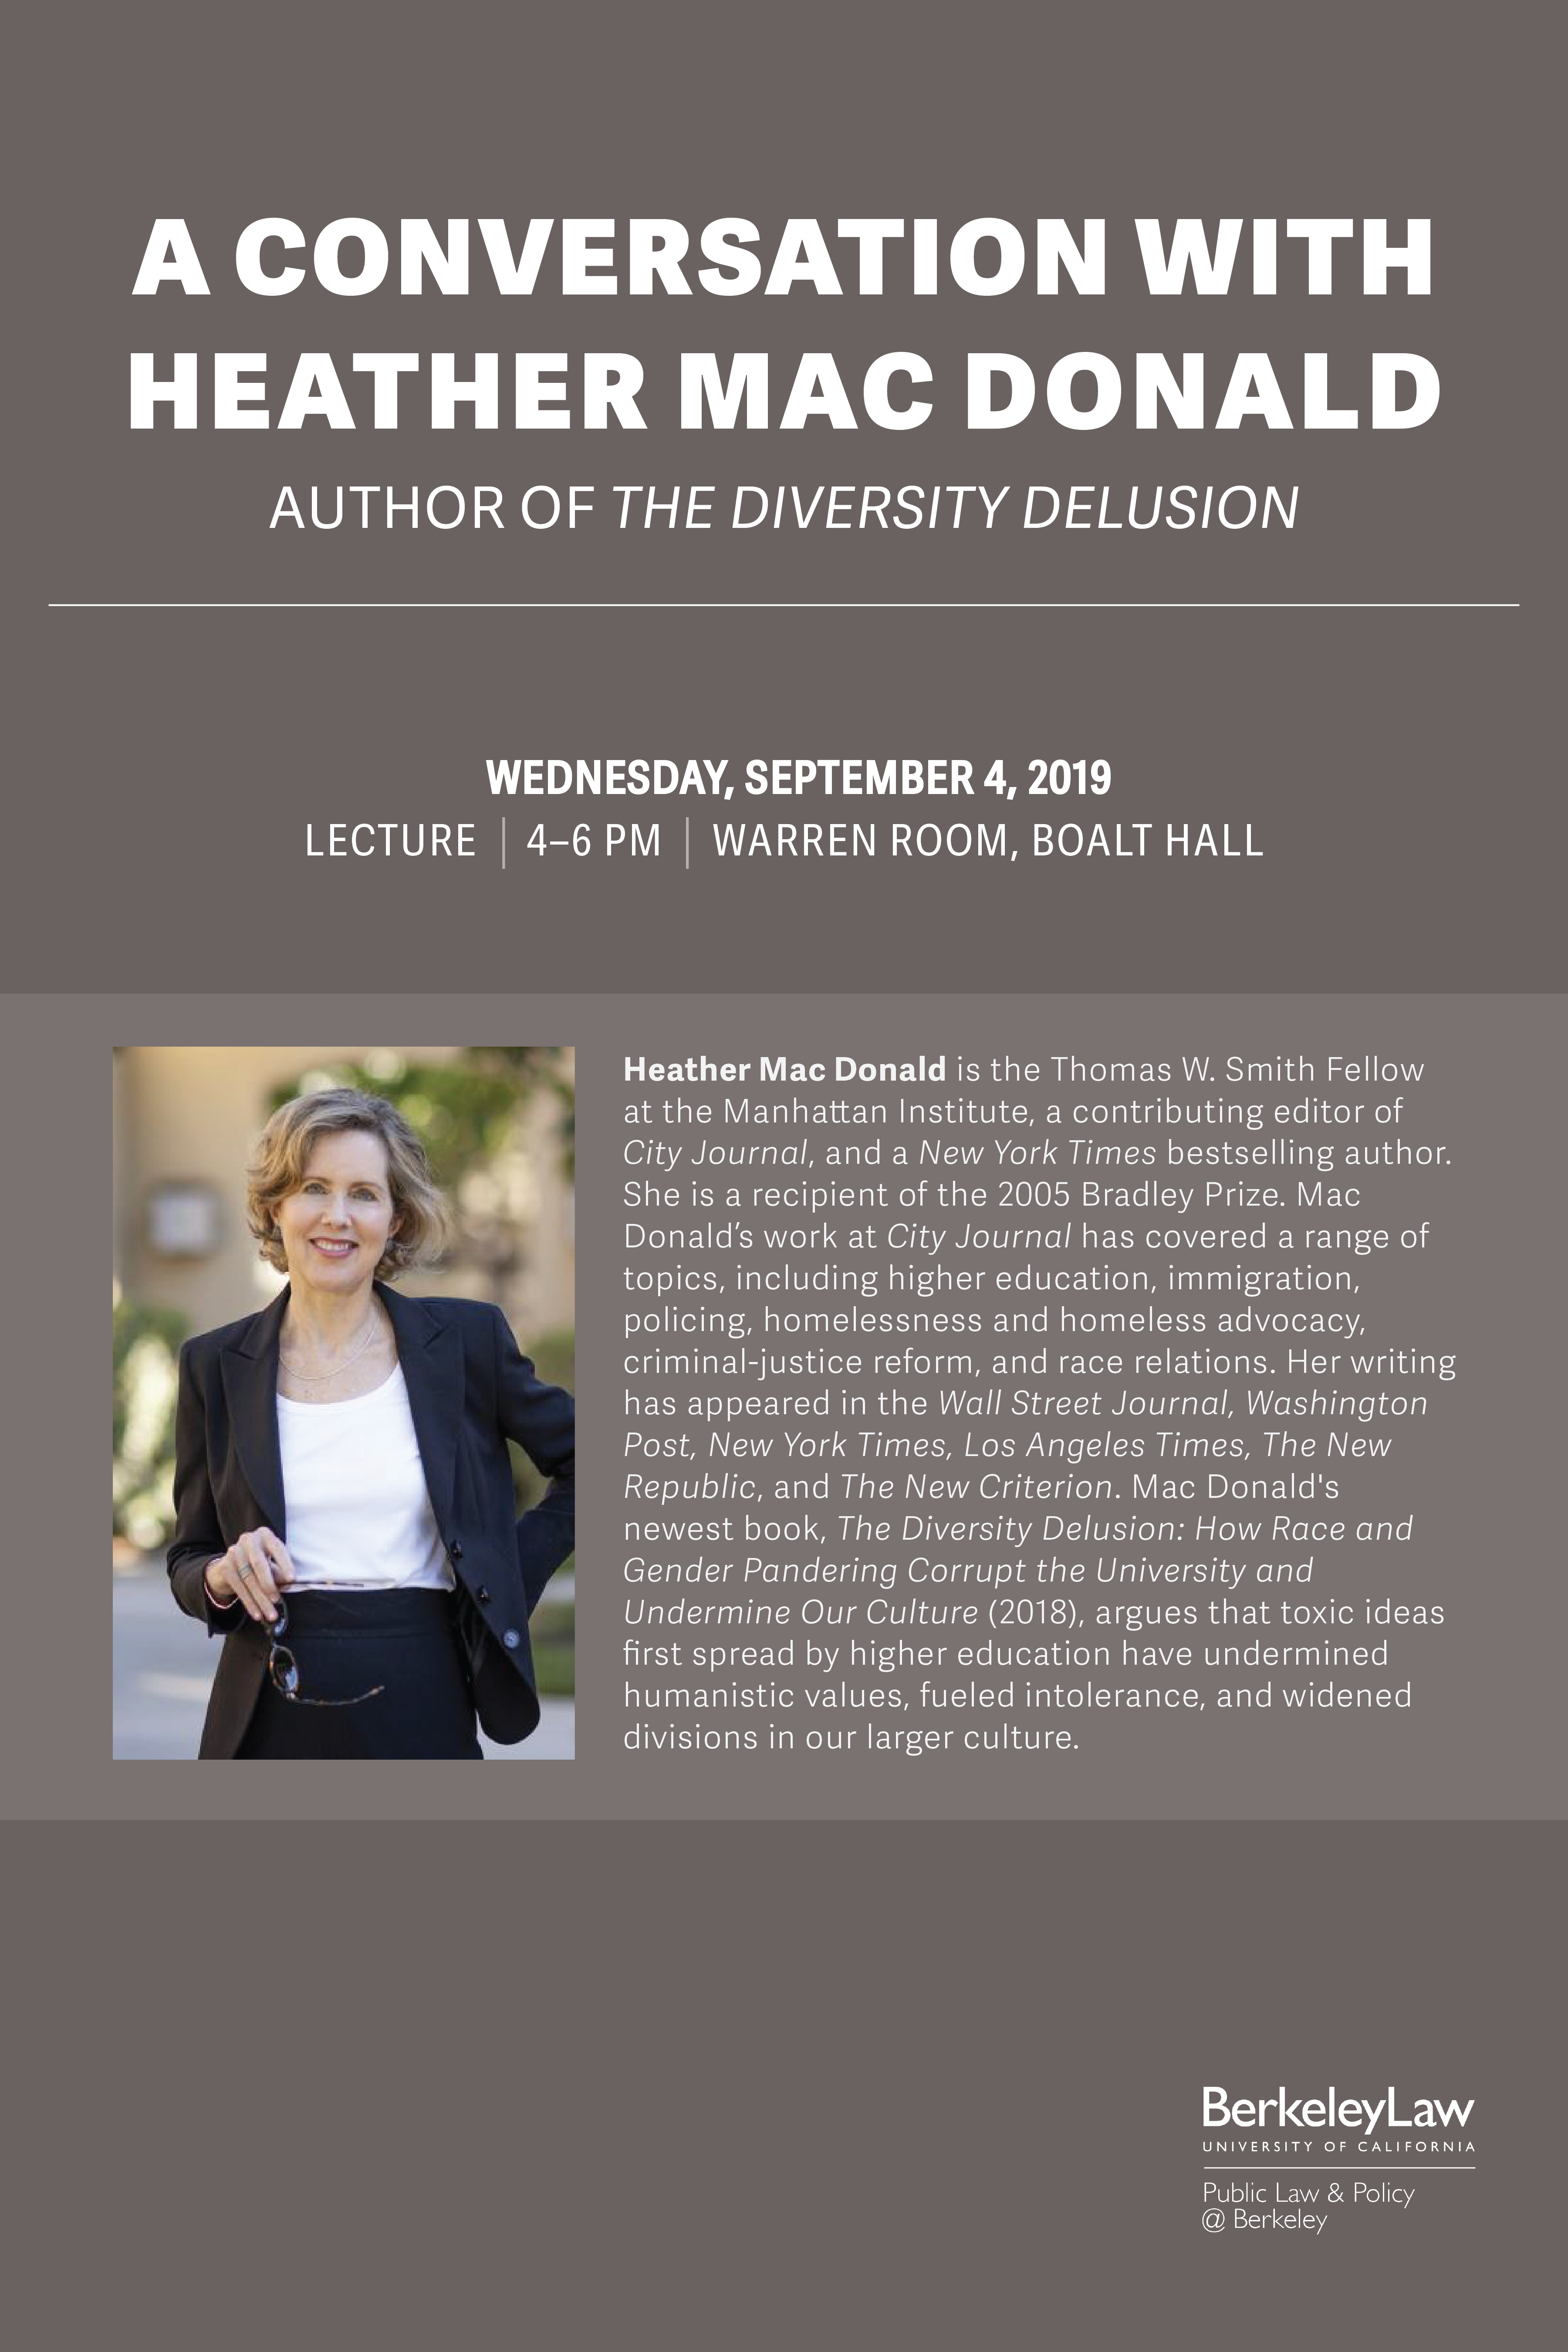 A Conversation with Heather Mac Donald